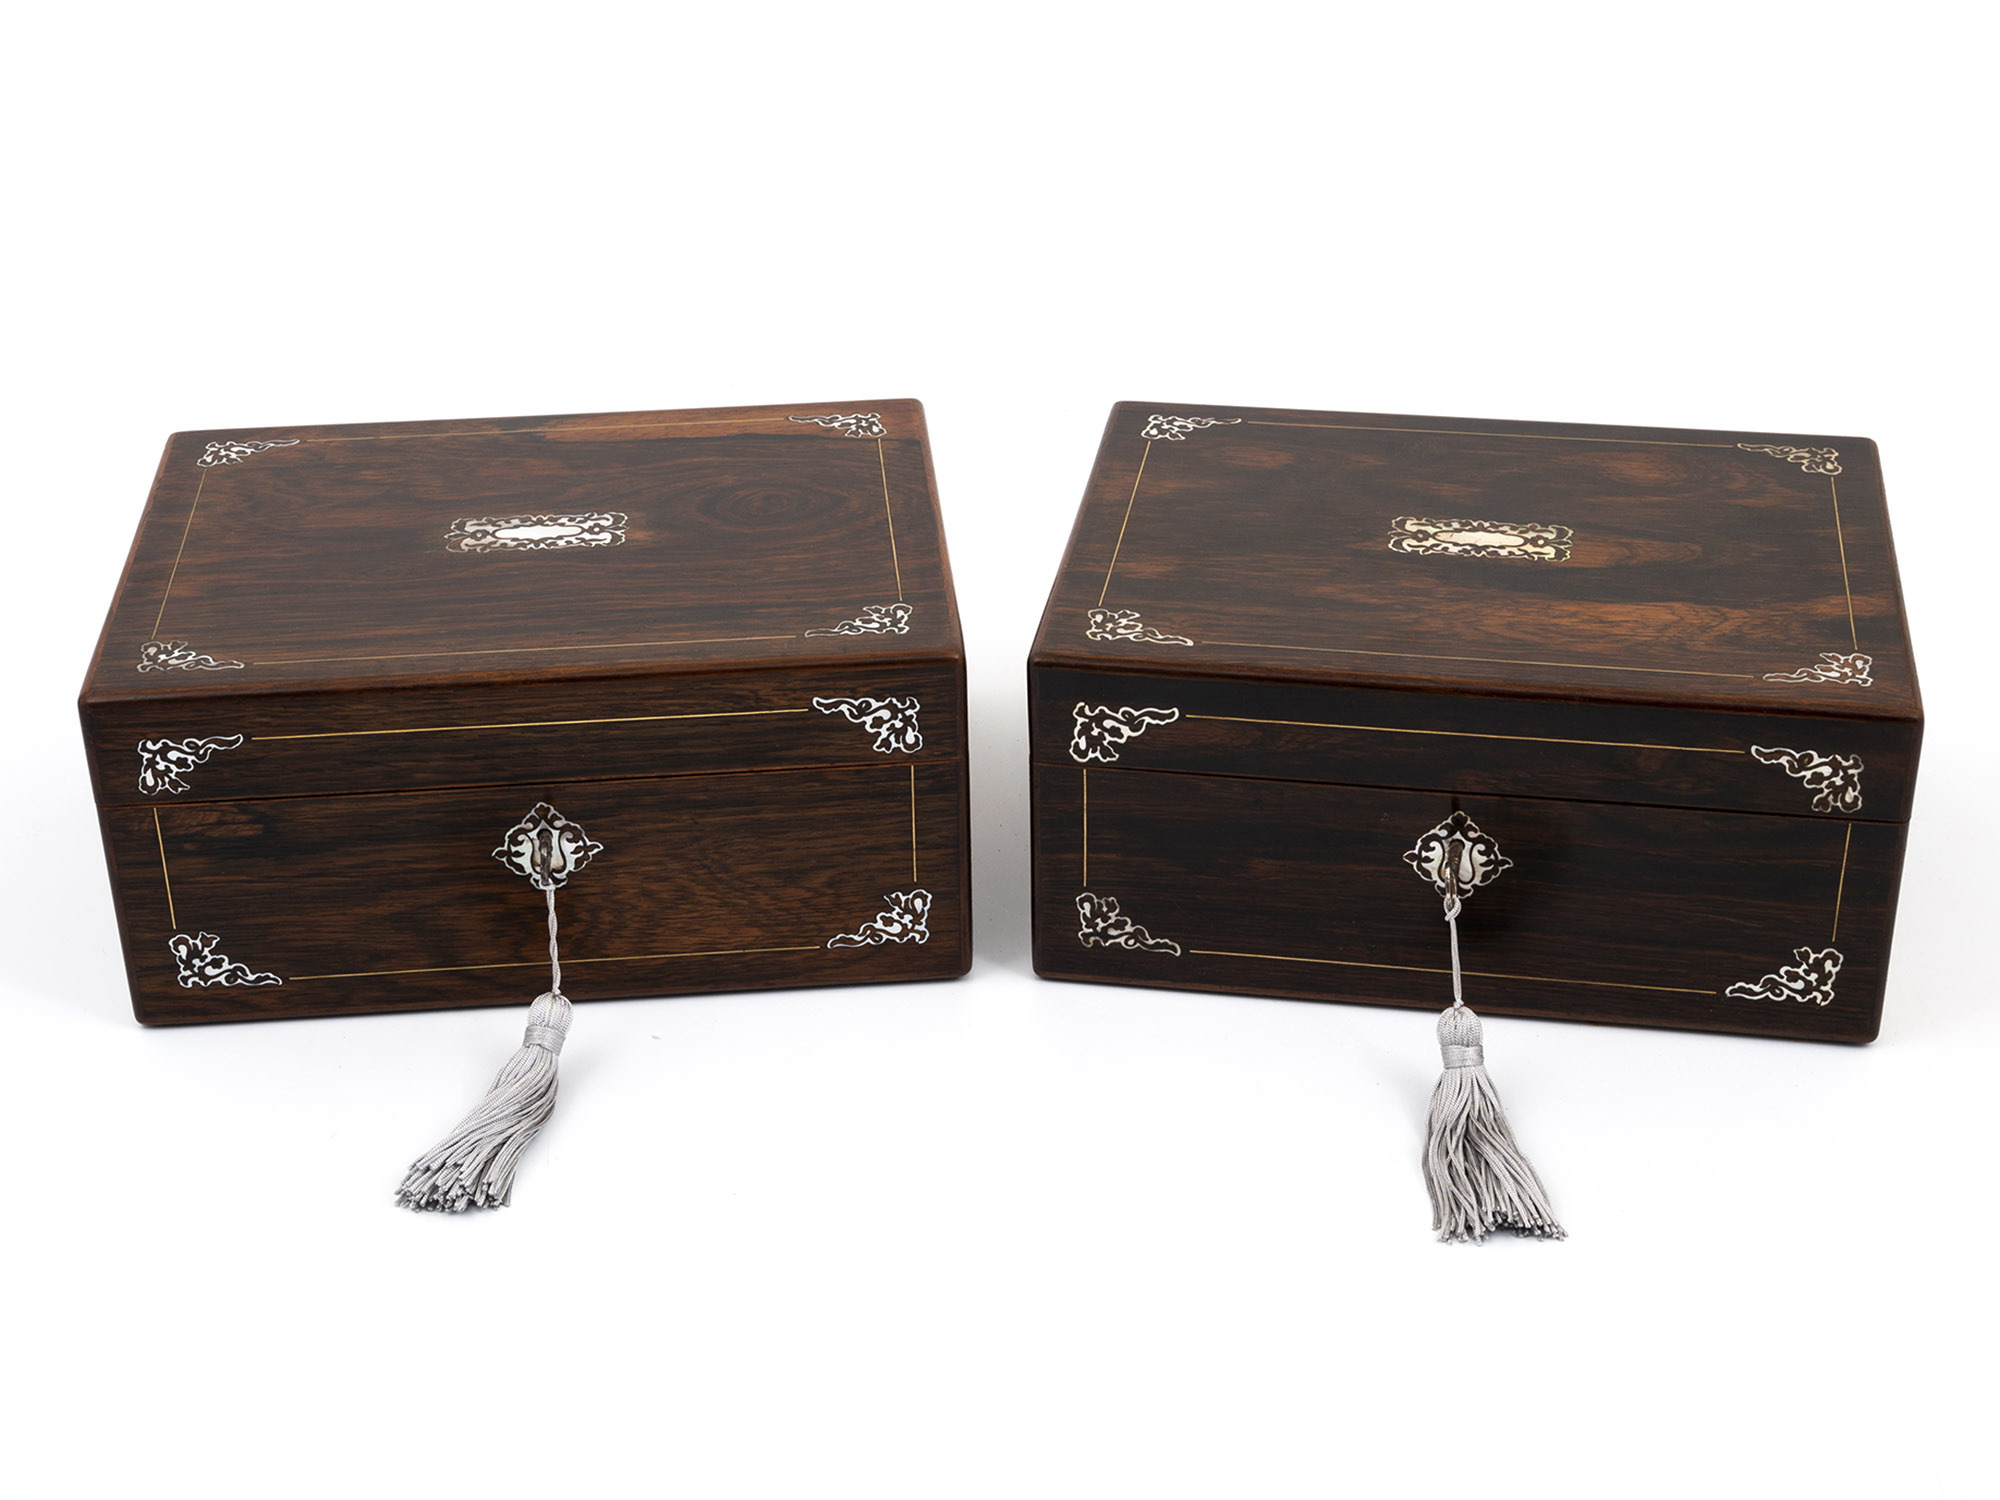 Georgian Rosewood Sewing Box Mirror Pair with Mother of Pearl